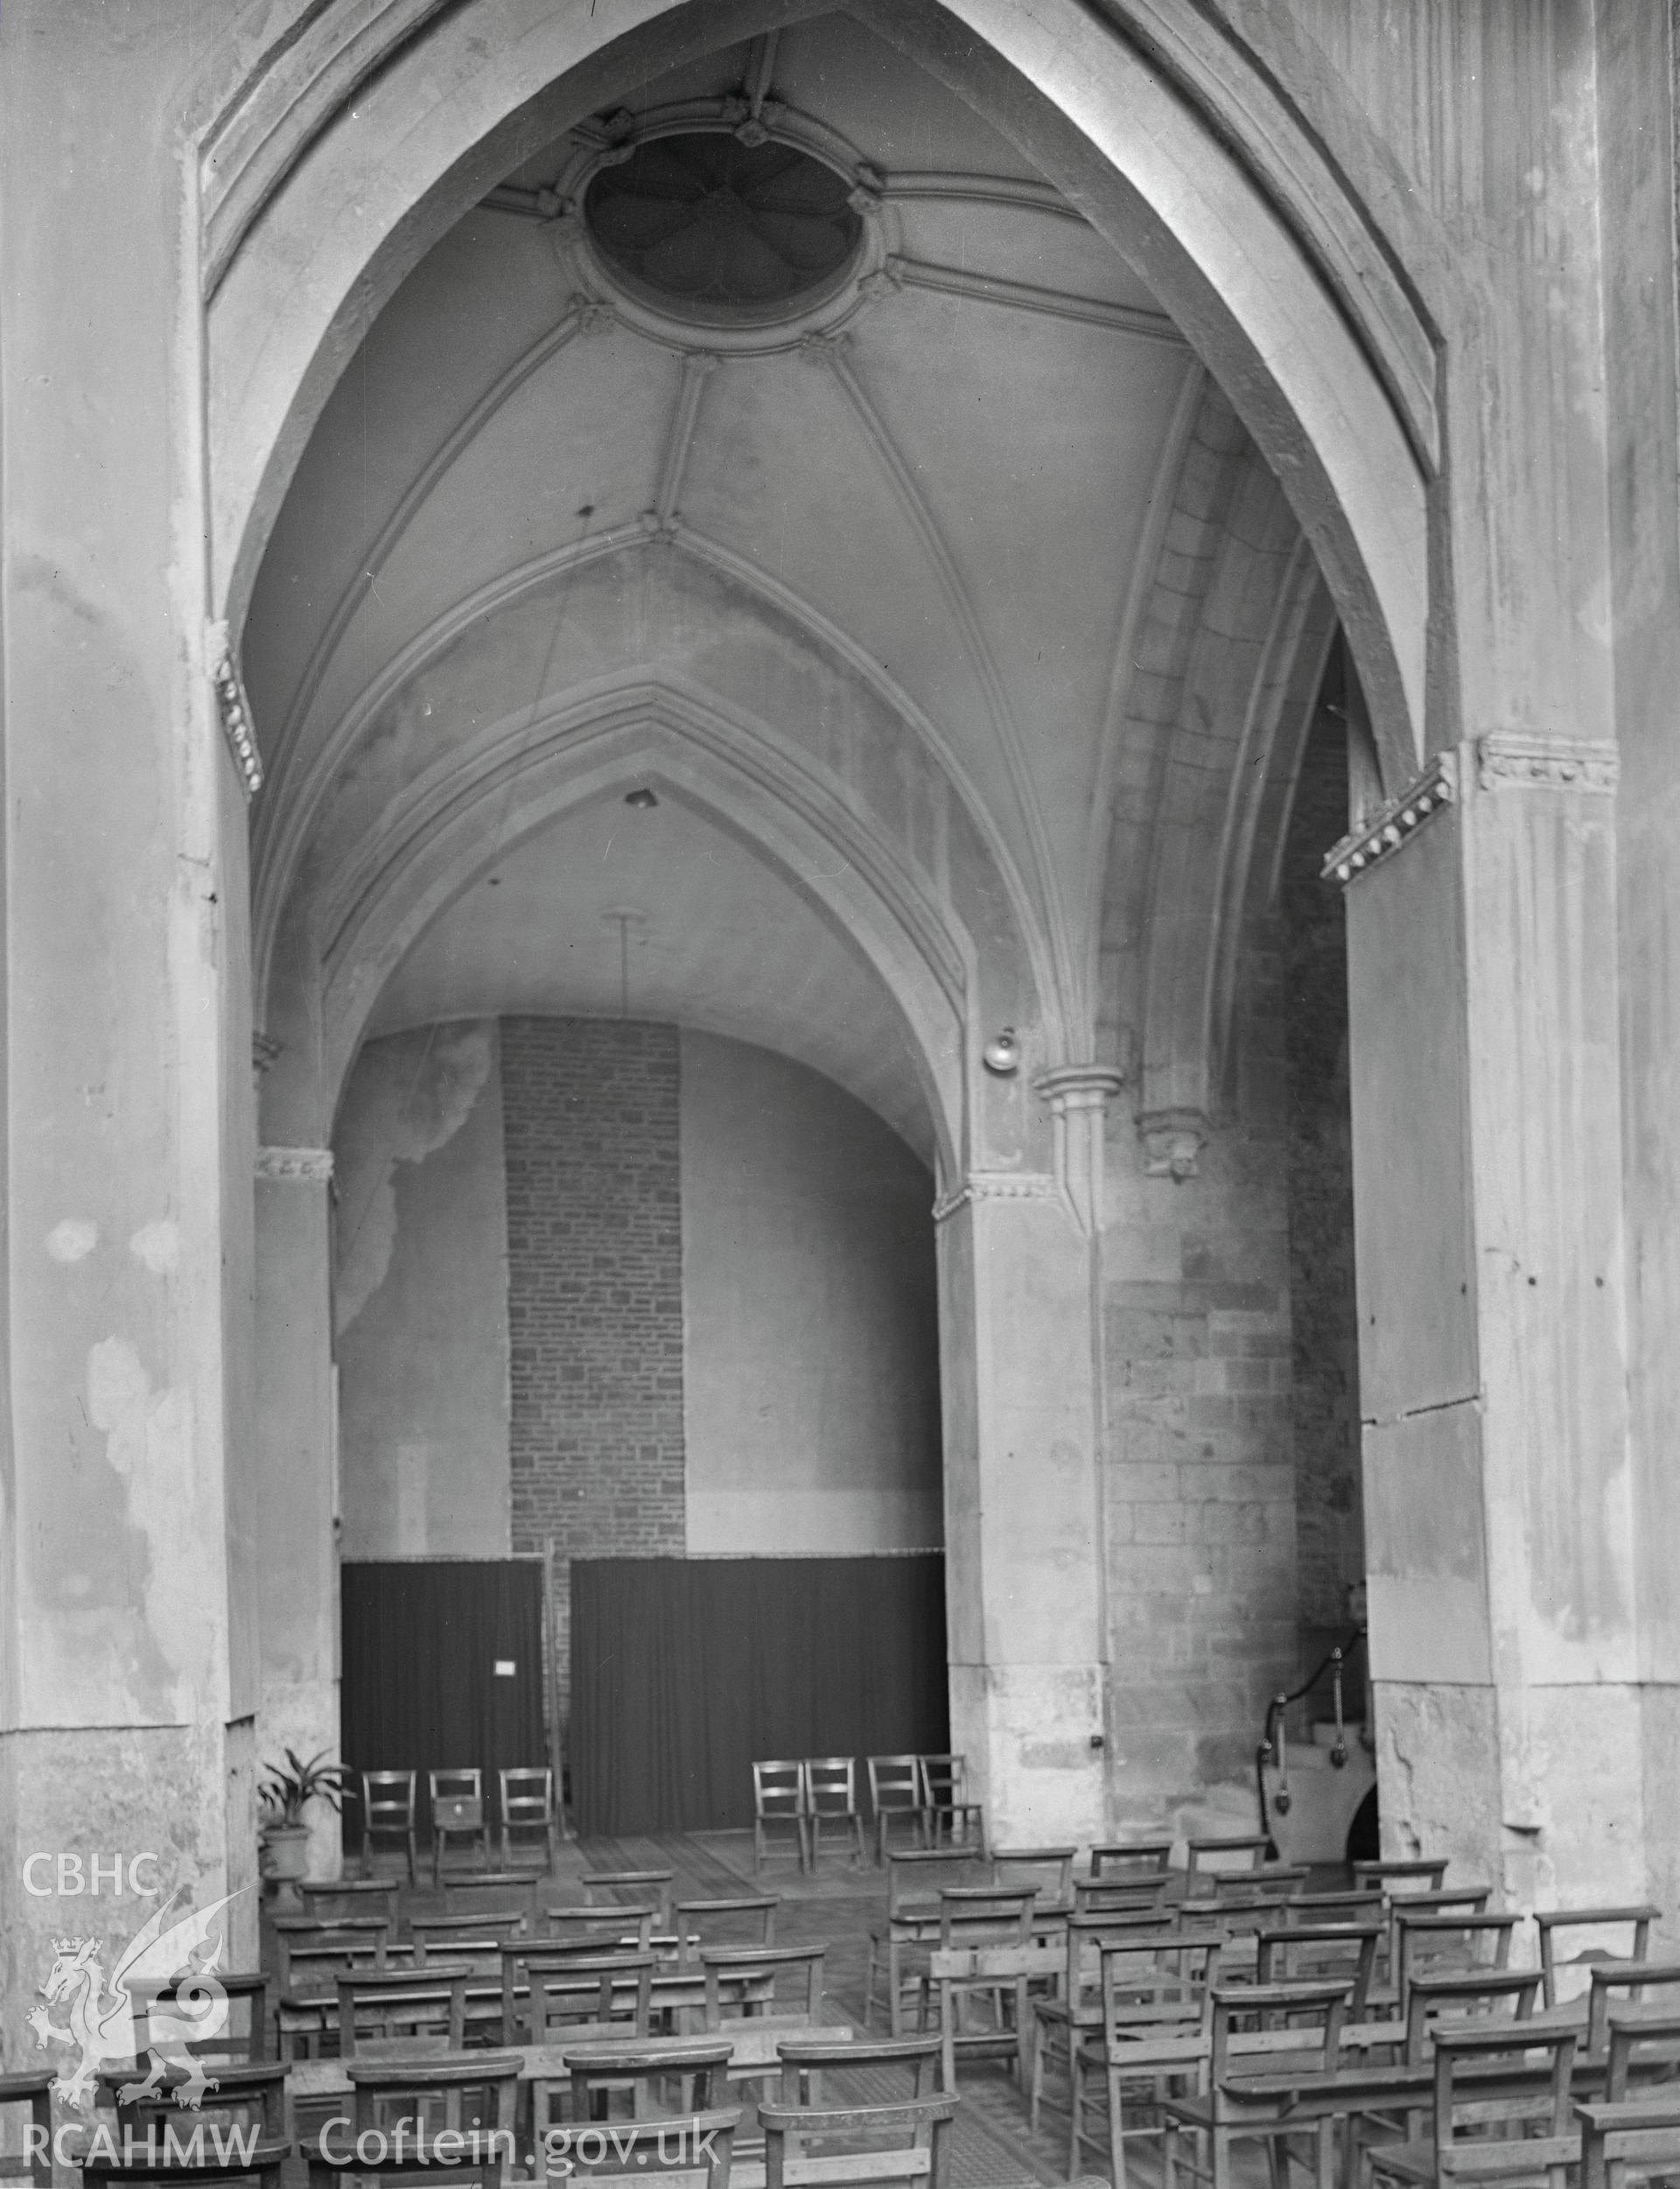 Interior view of the church showing tower arches looking south